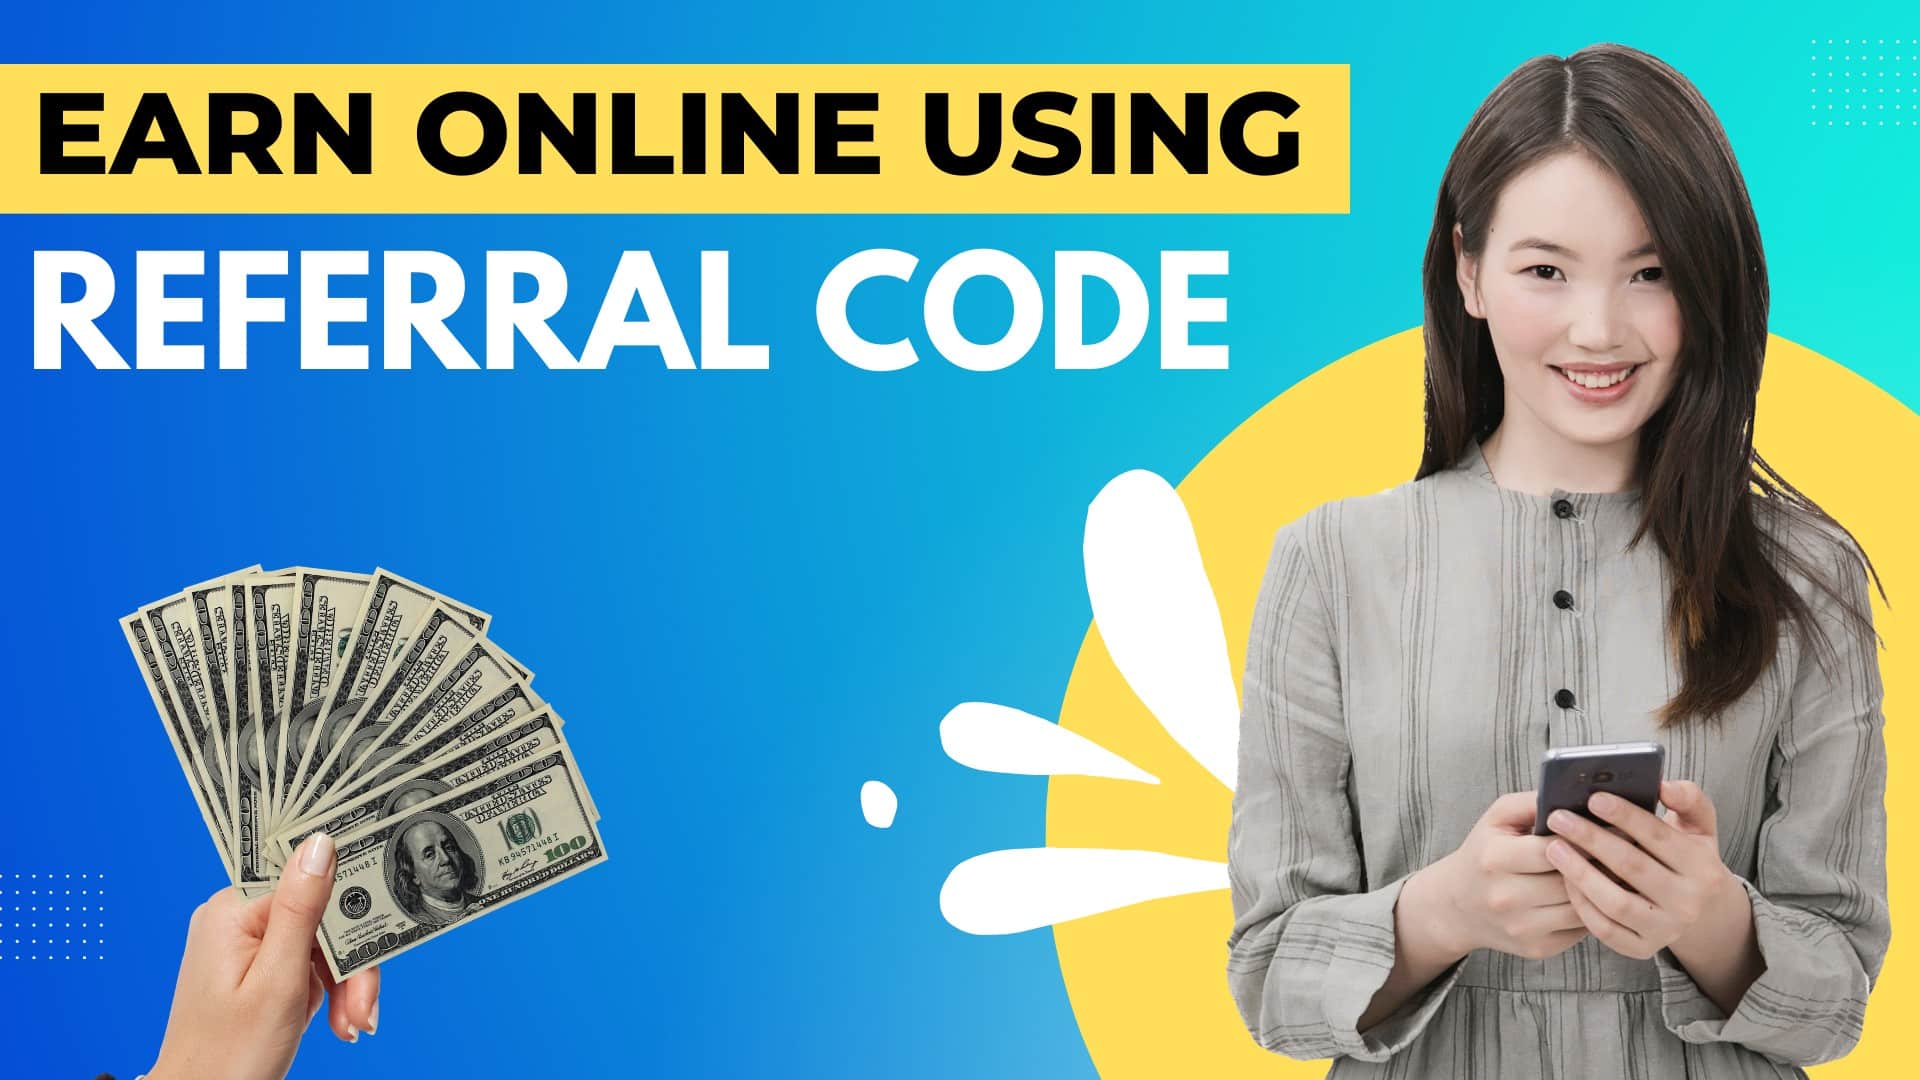 What is Referral Code, and How to Earn with it